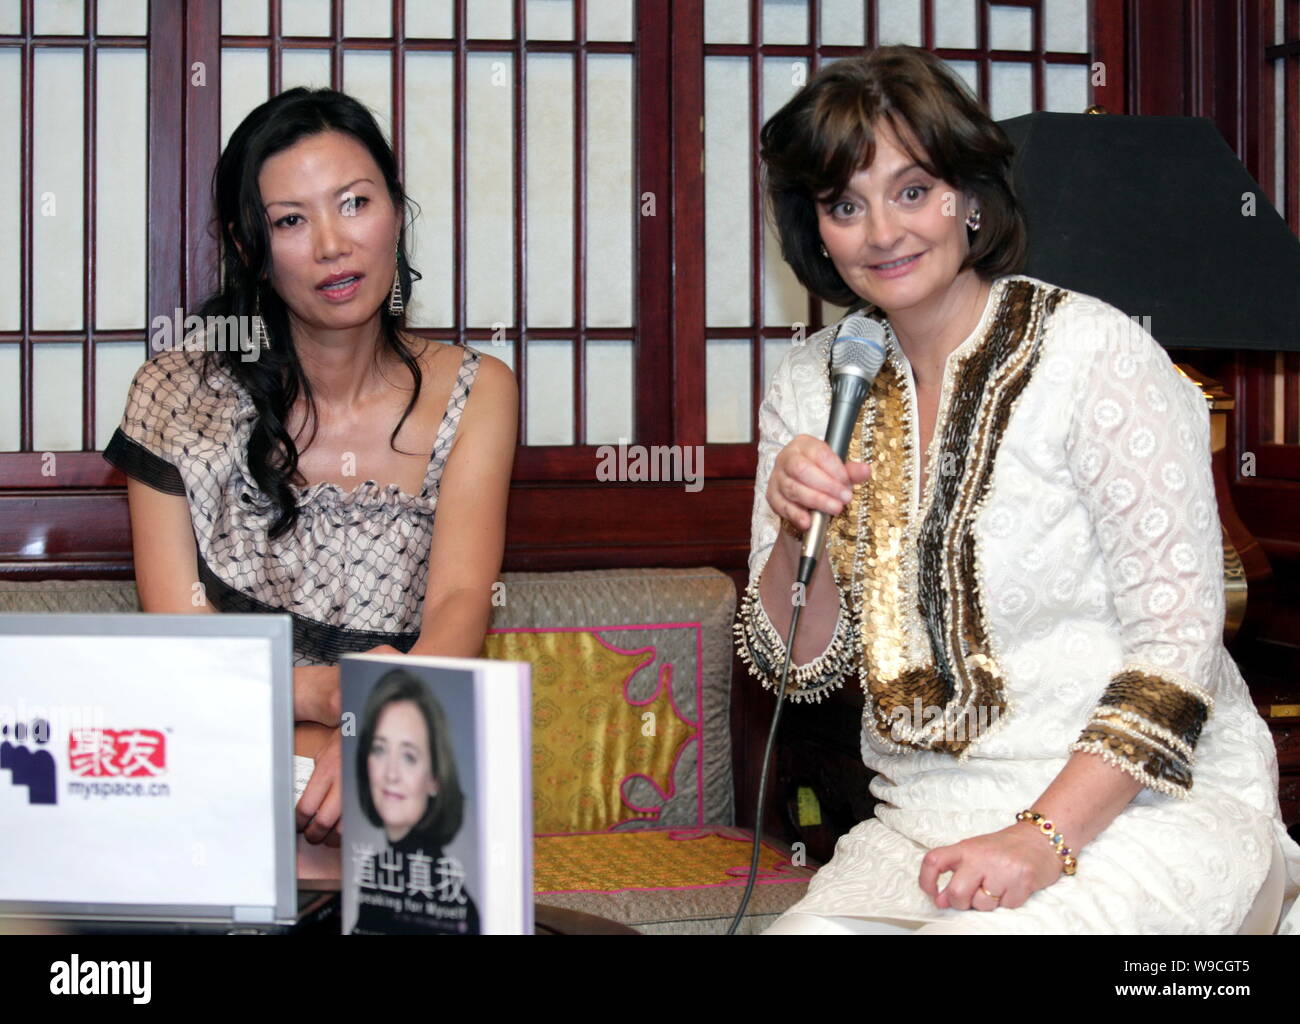 Cherie Blair, right, wife of former British Prime Minister Tony Blair, speaks next to Wendi Deng Murdoch, wife of News Corp. Chairman and CEO Rupert M Stock Photo